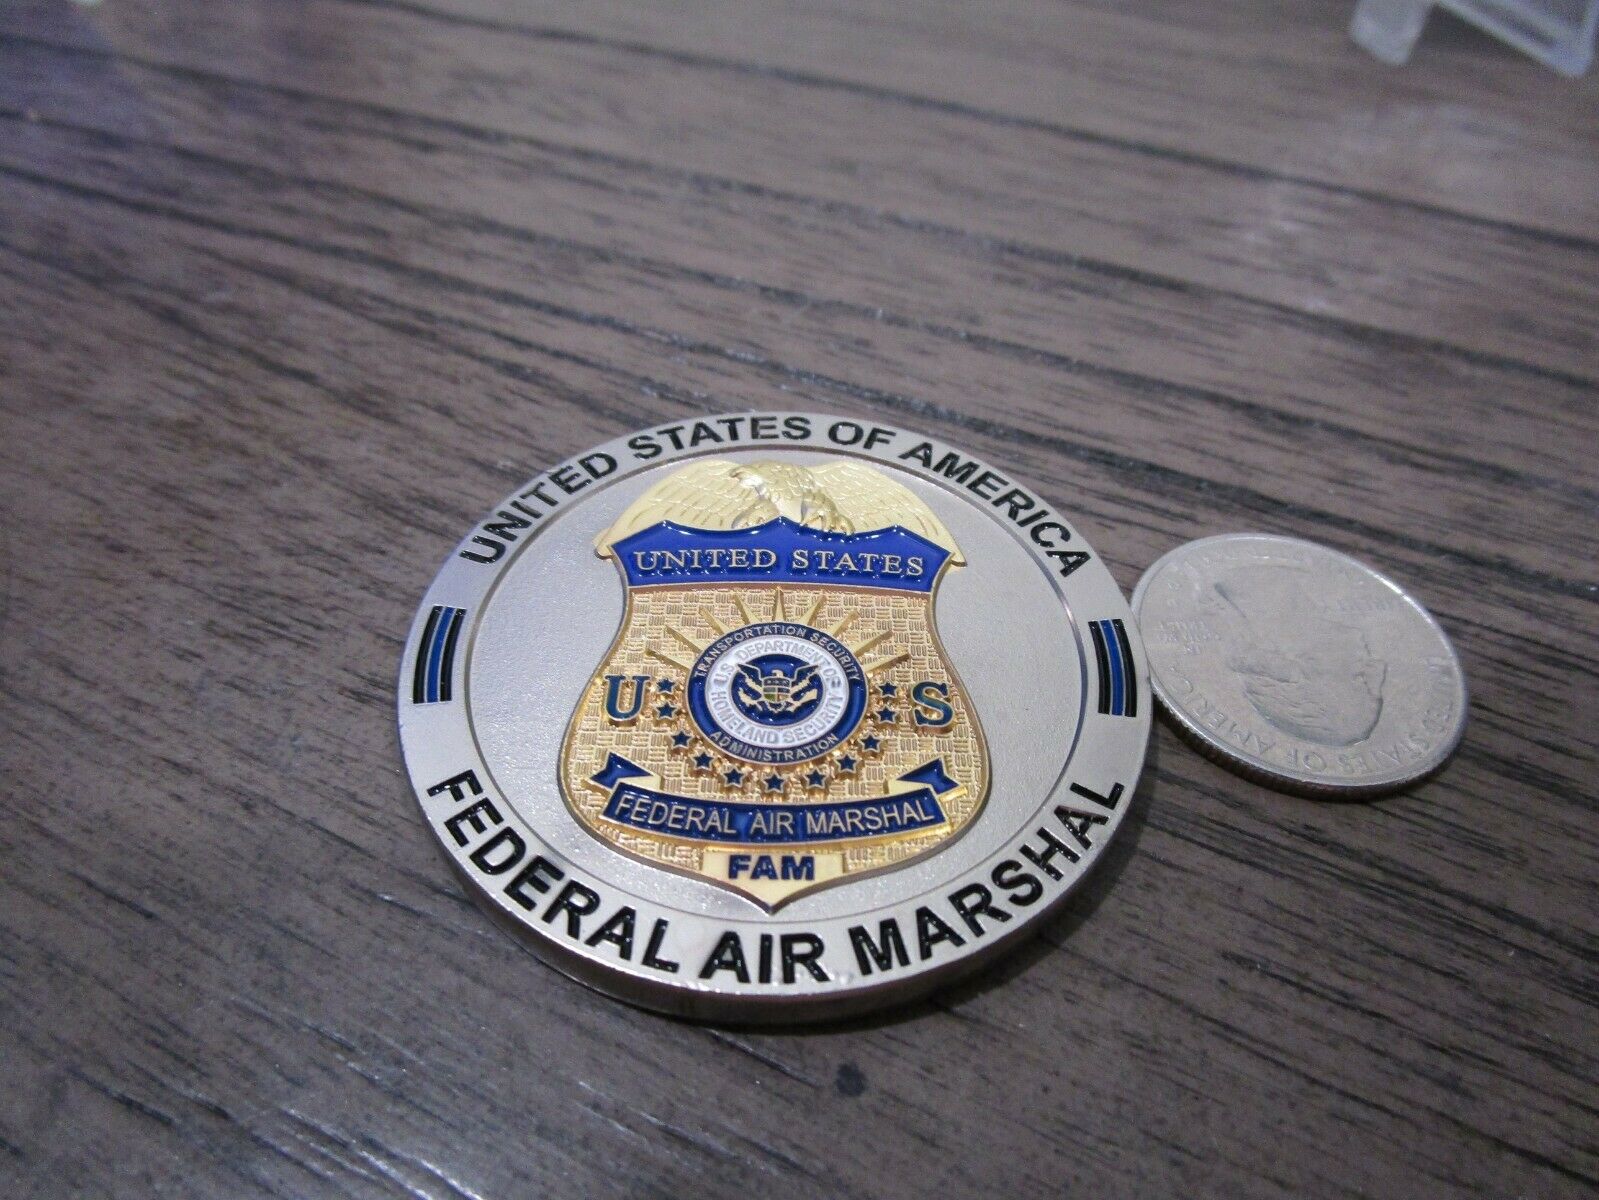 Federal Air Marshal One Team One Fight Western Masked Skull Challenge Coin